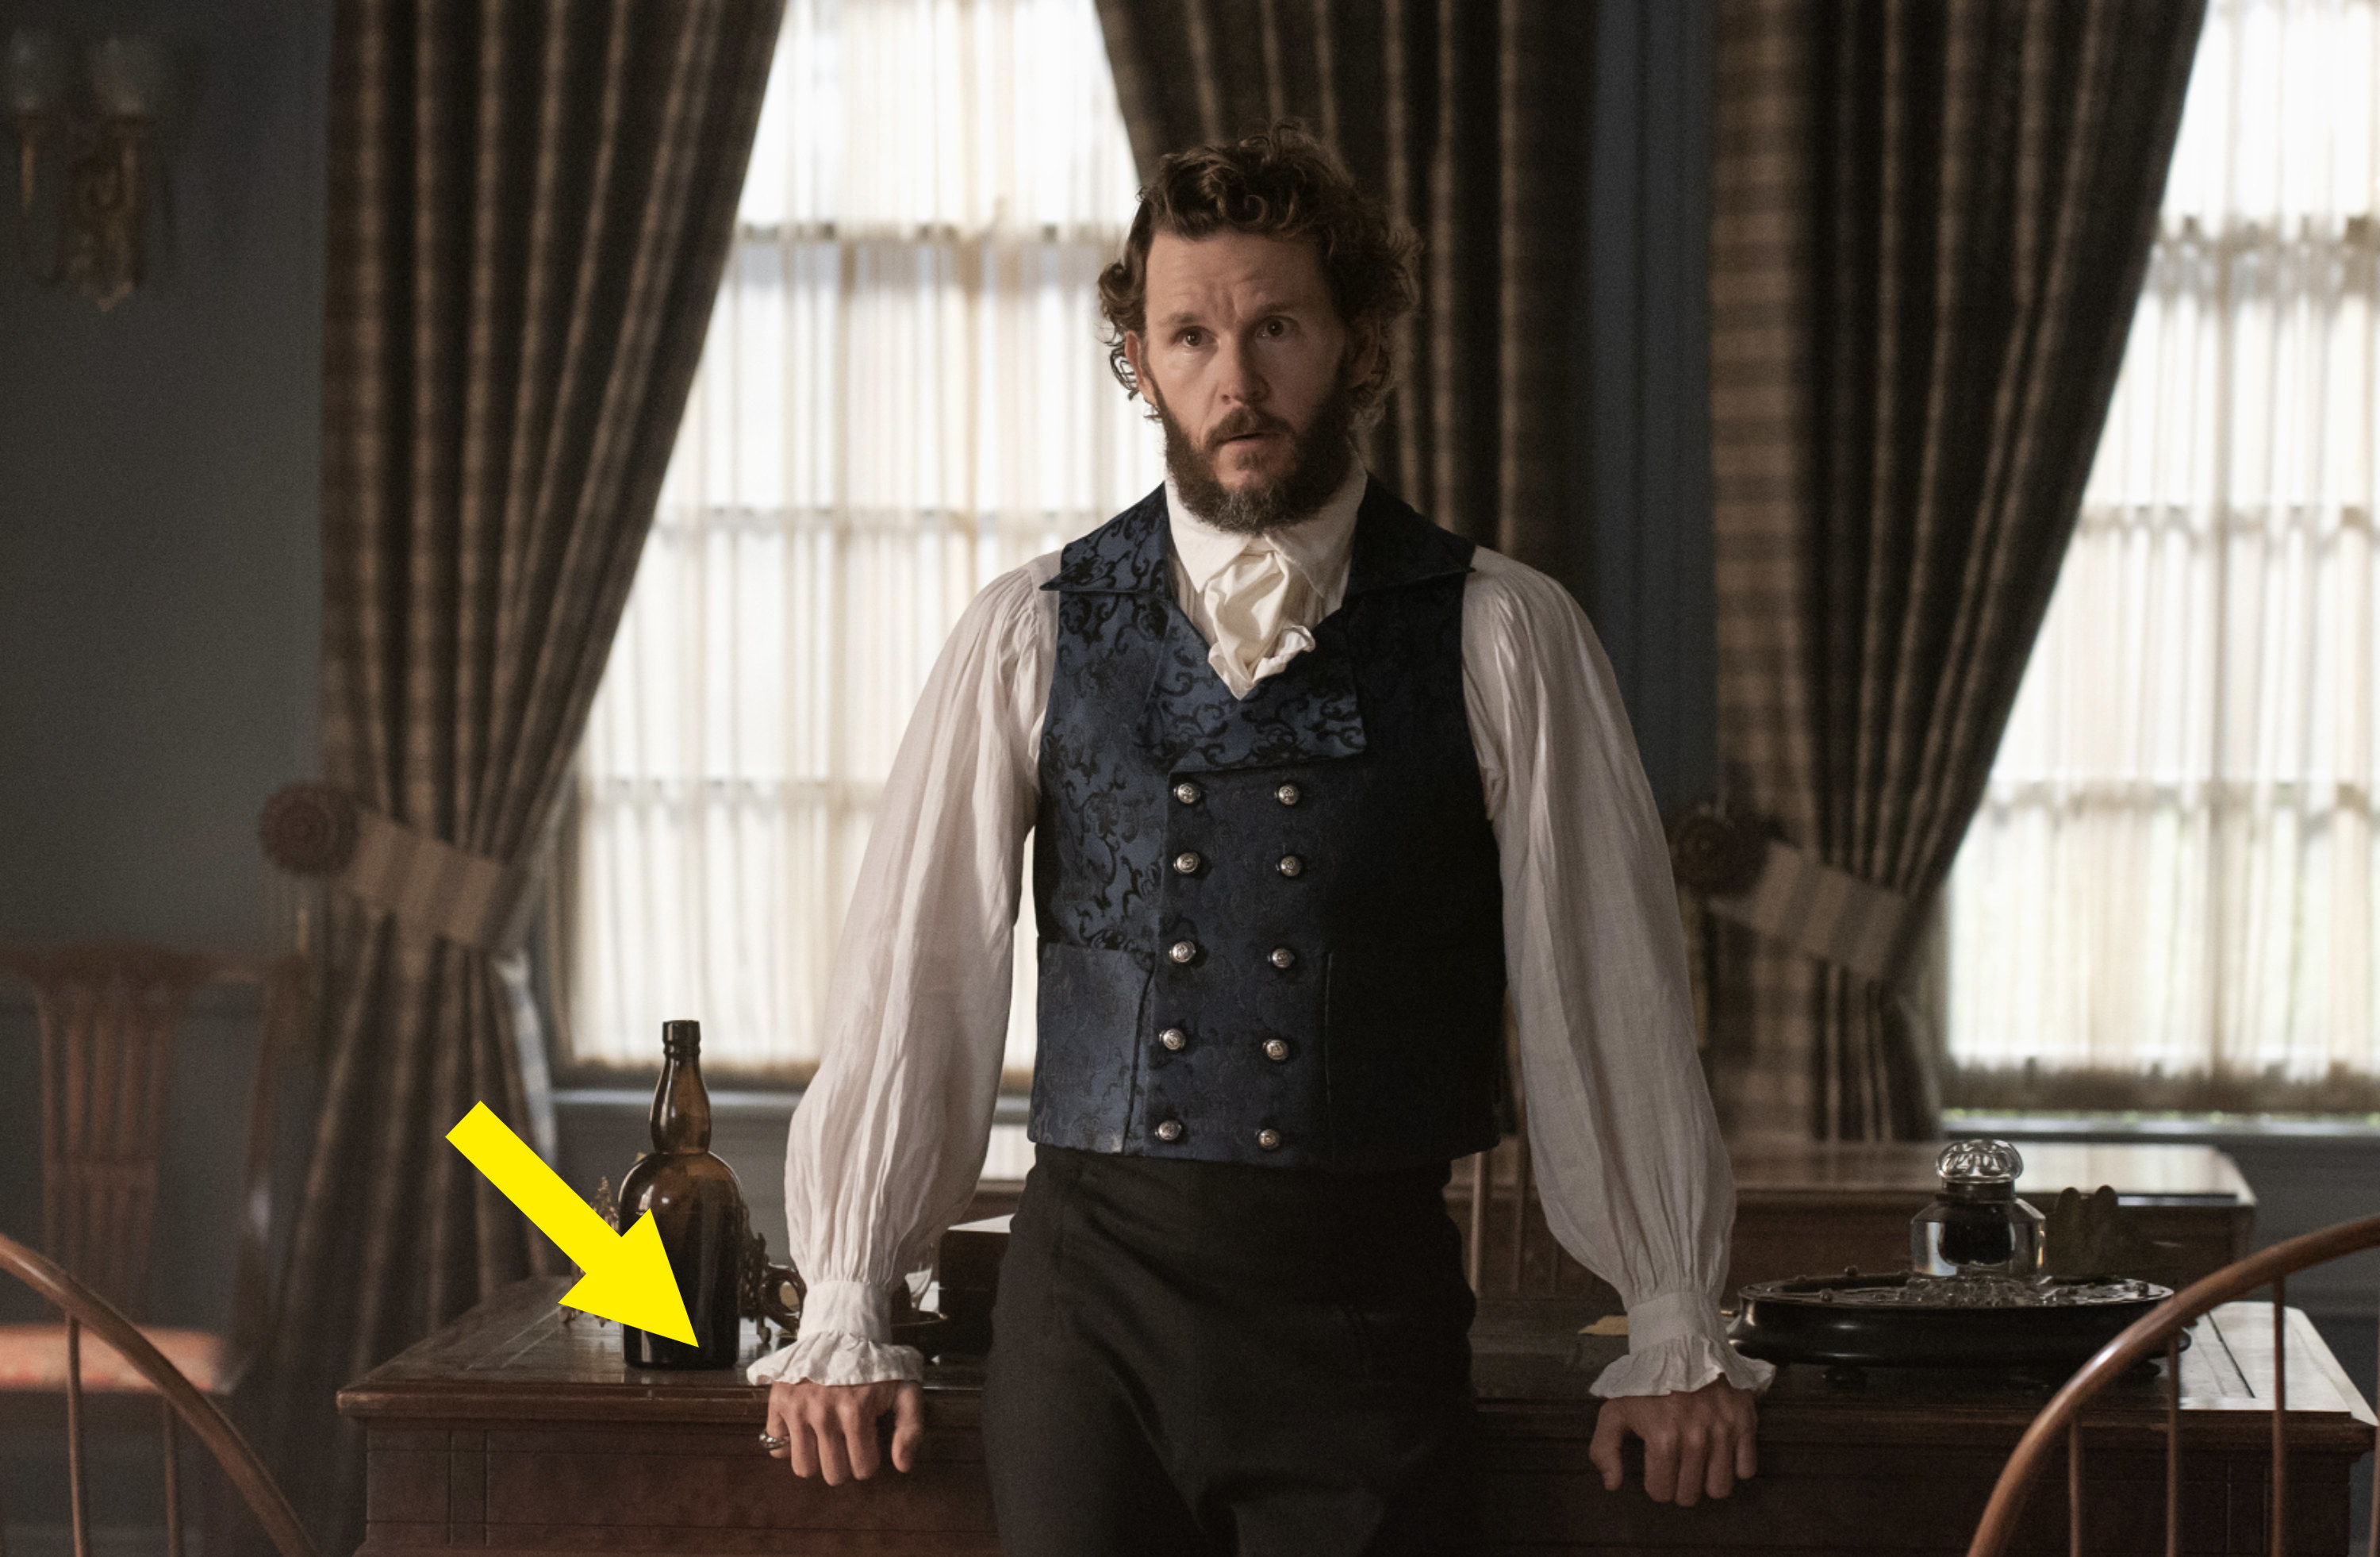 Ryan as Tom leaning against a desk with an arrow pointing at his ring